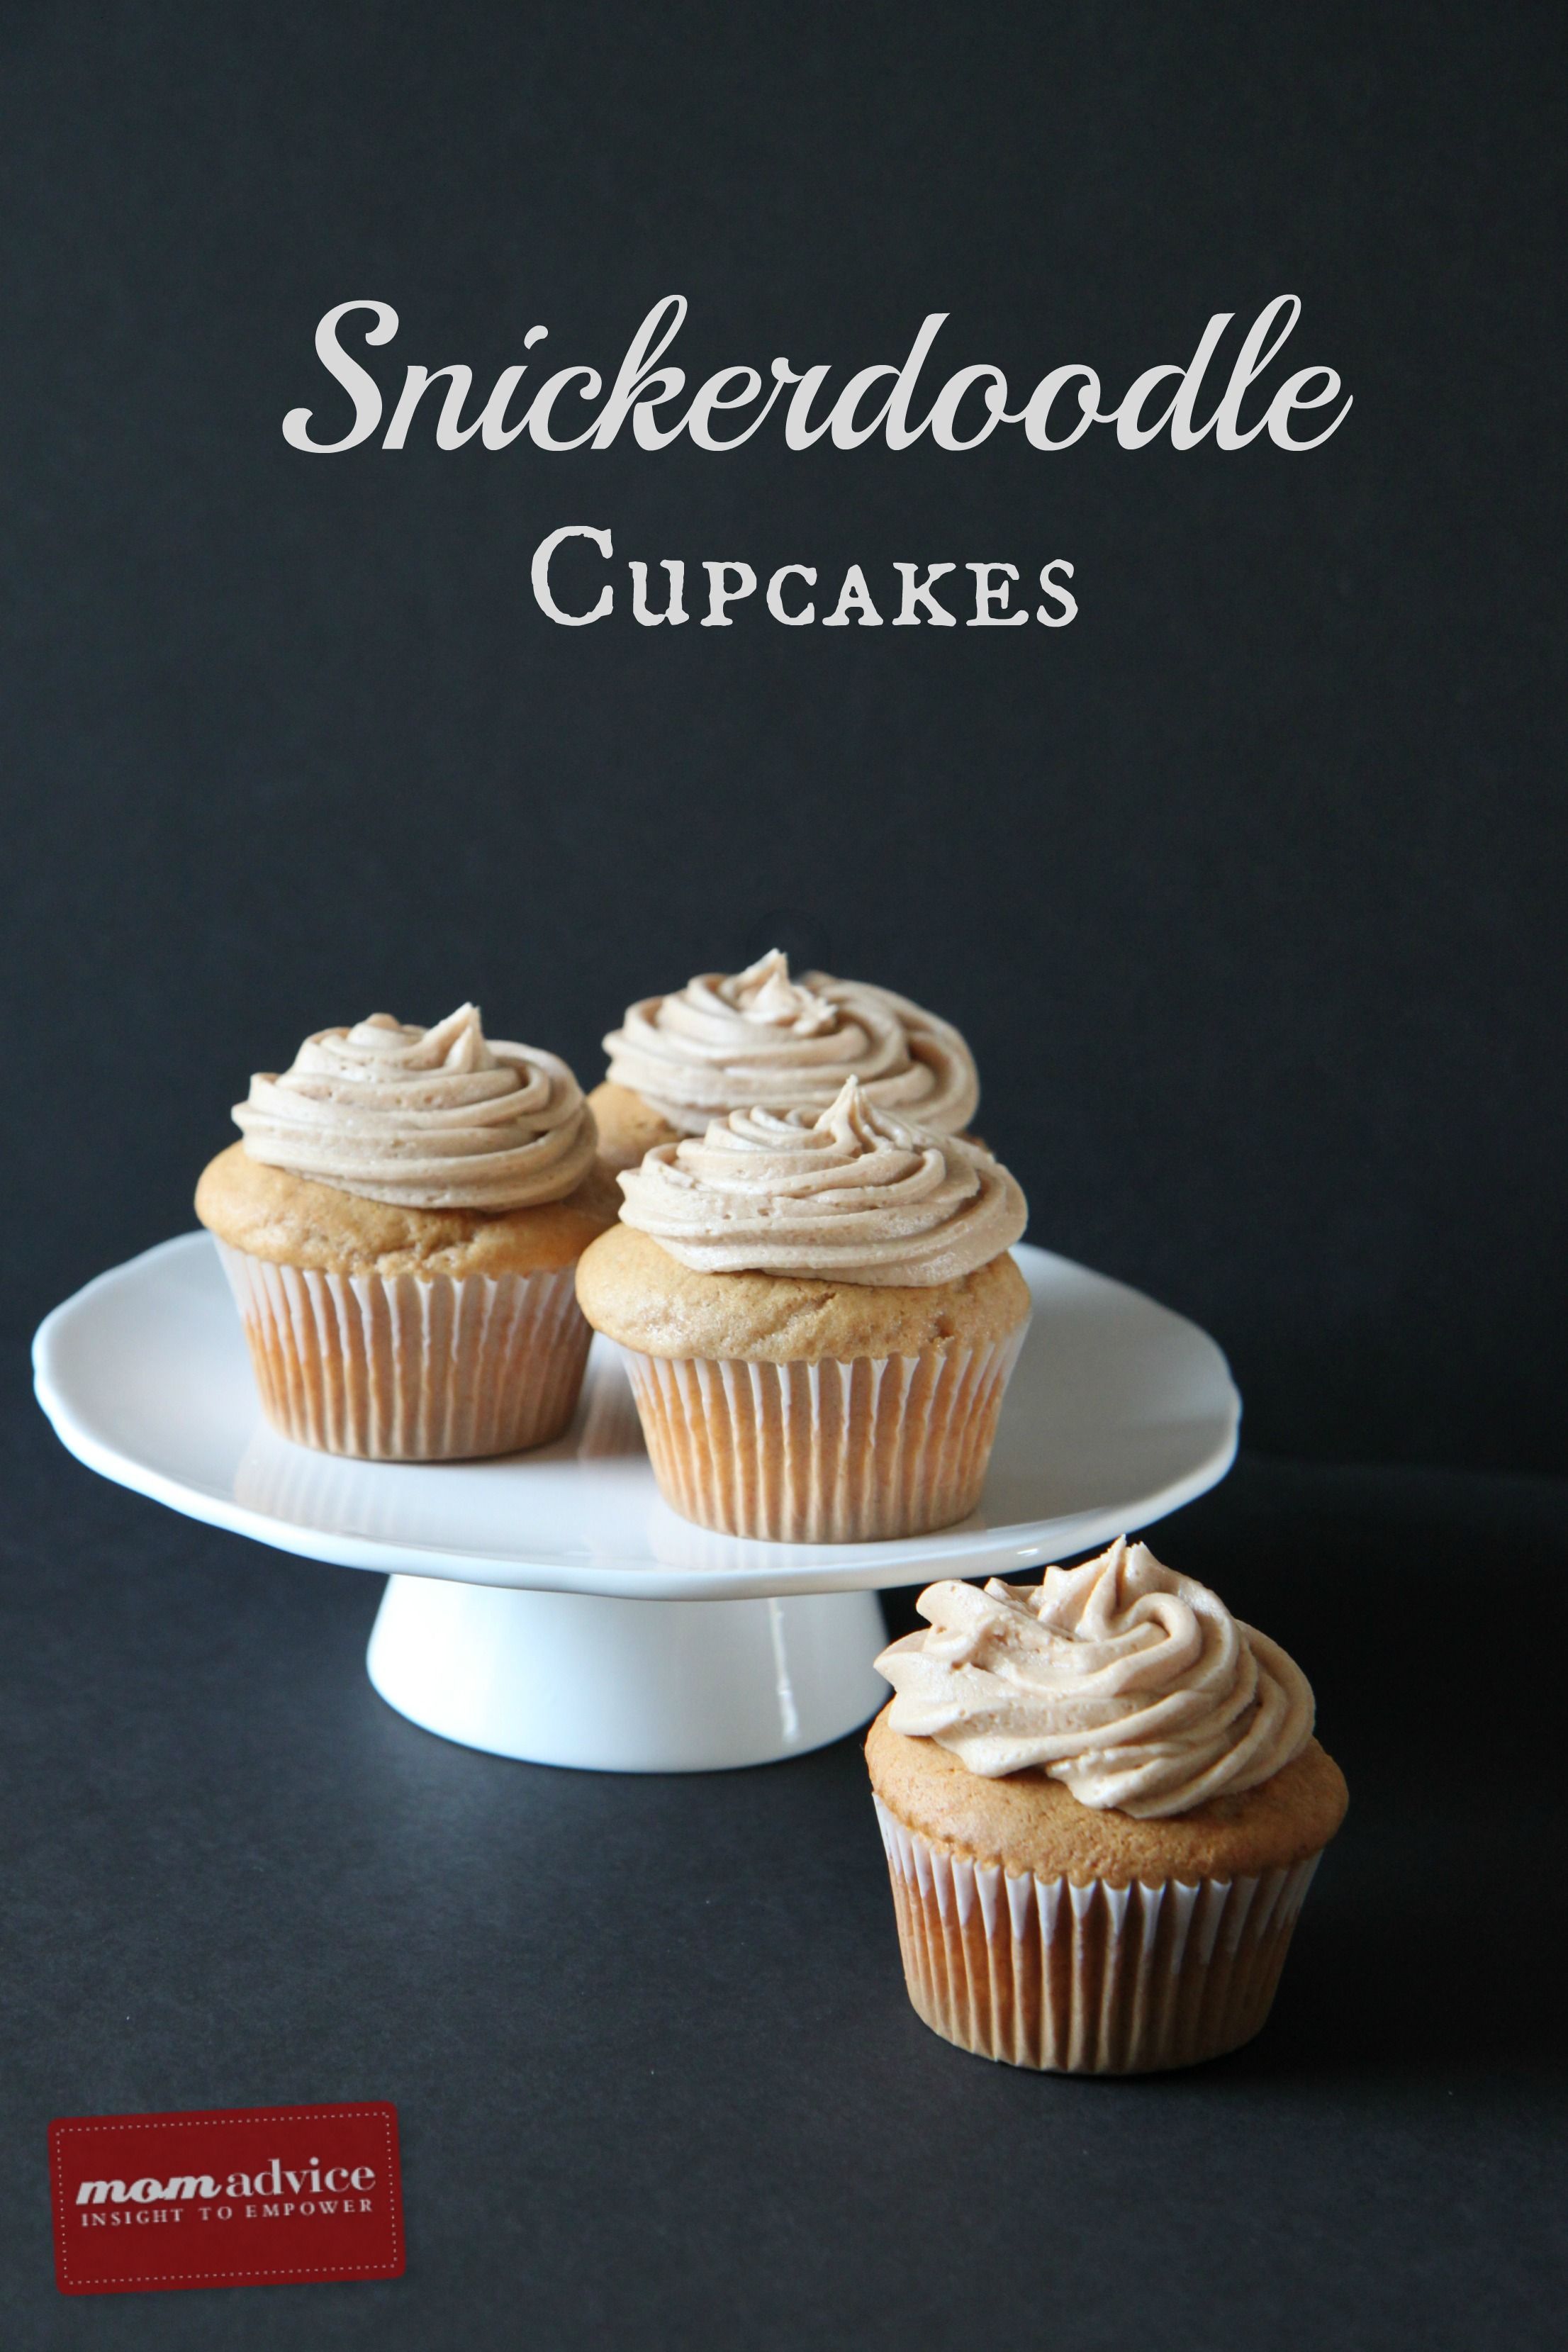 Snickerdoodle Cupcakes  1 package plain white cake mix or yellow cake mix  1 cup whole milk (I used skim milk and it still tasted